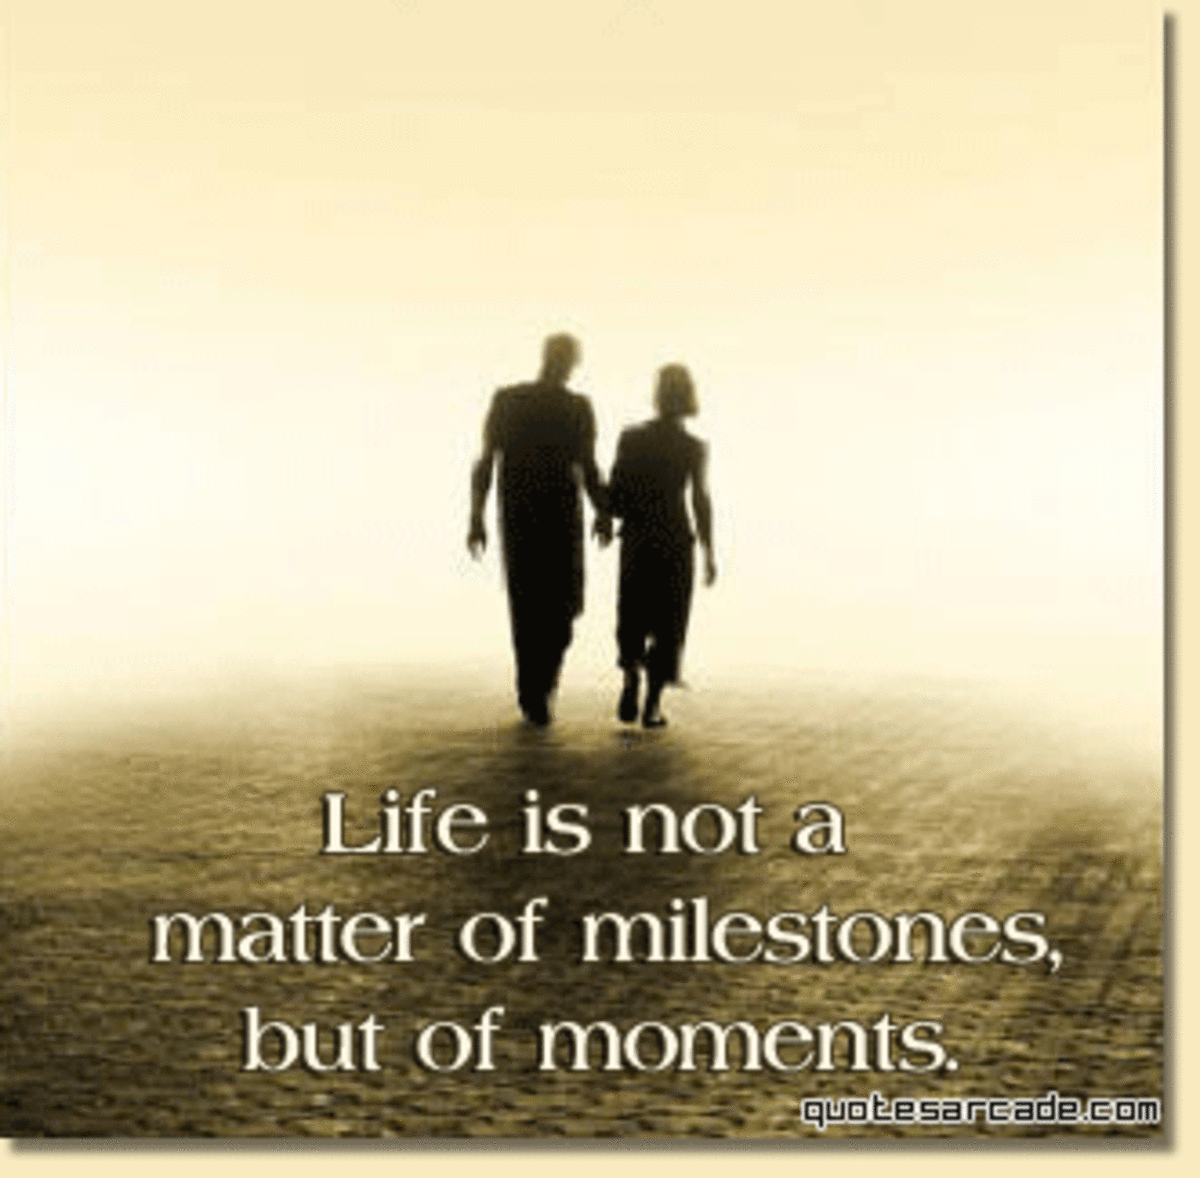 "Life is not a matter of milestones, it is a matter of moments."